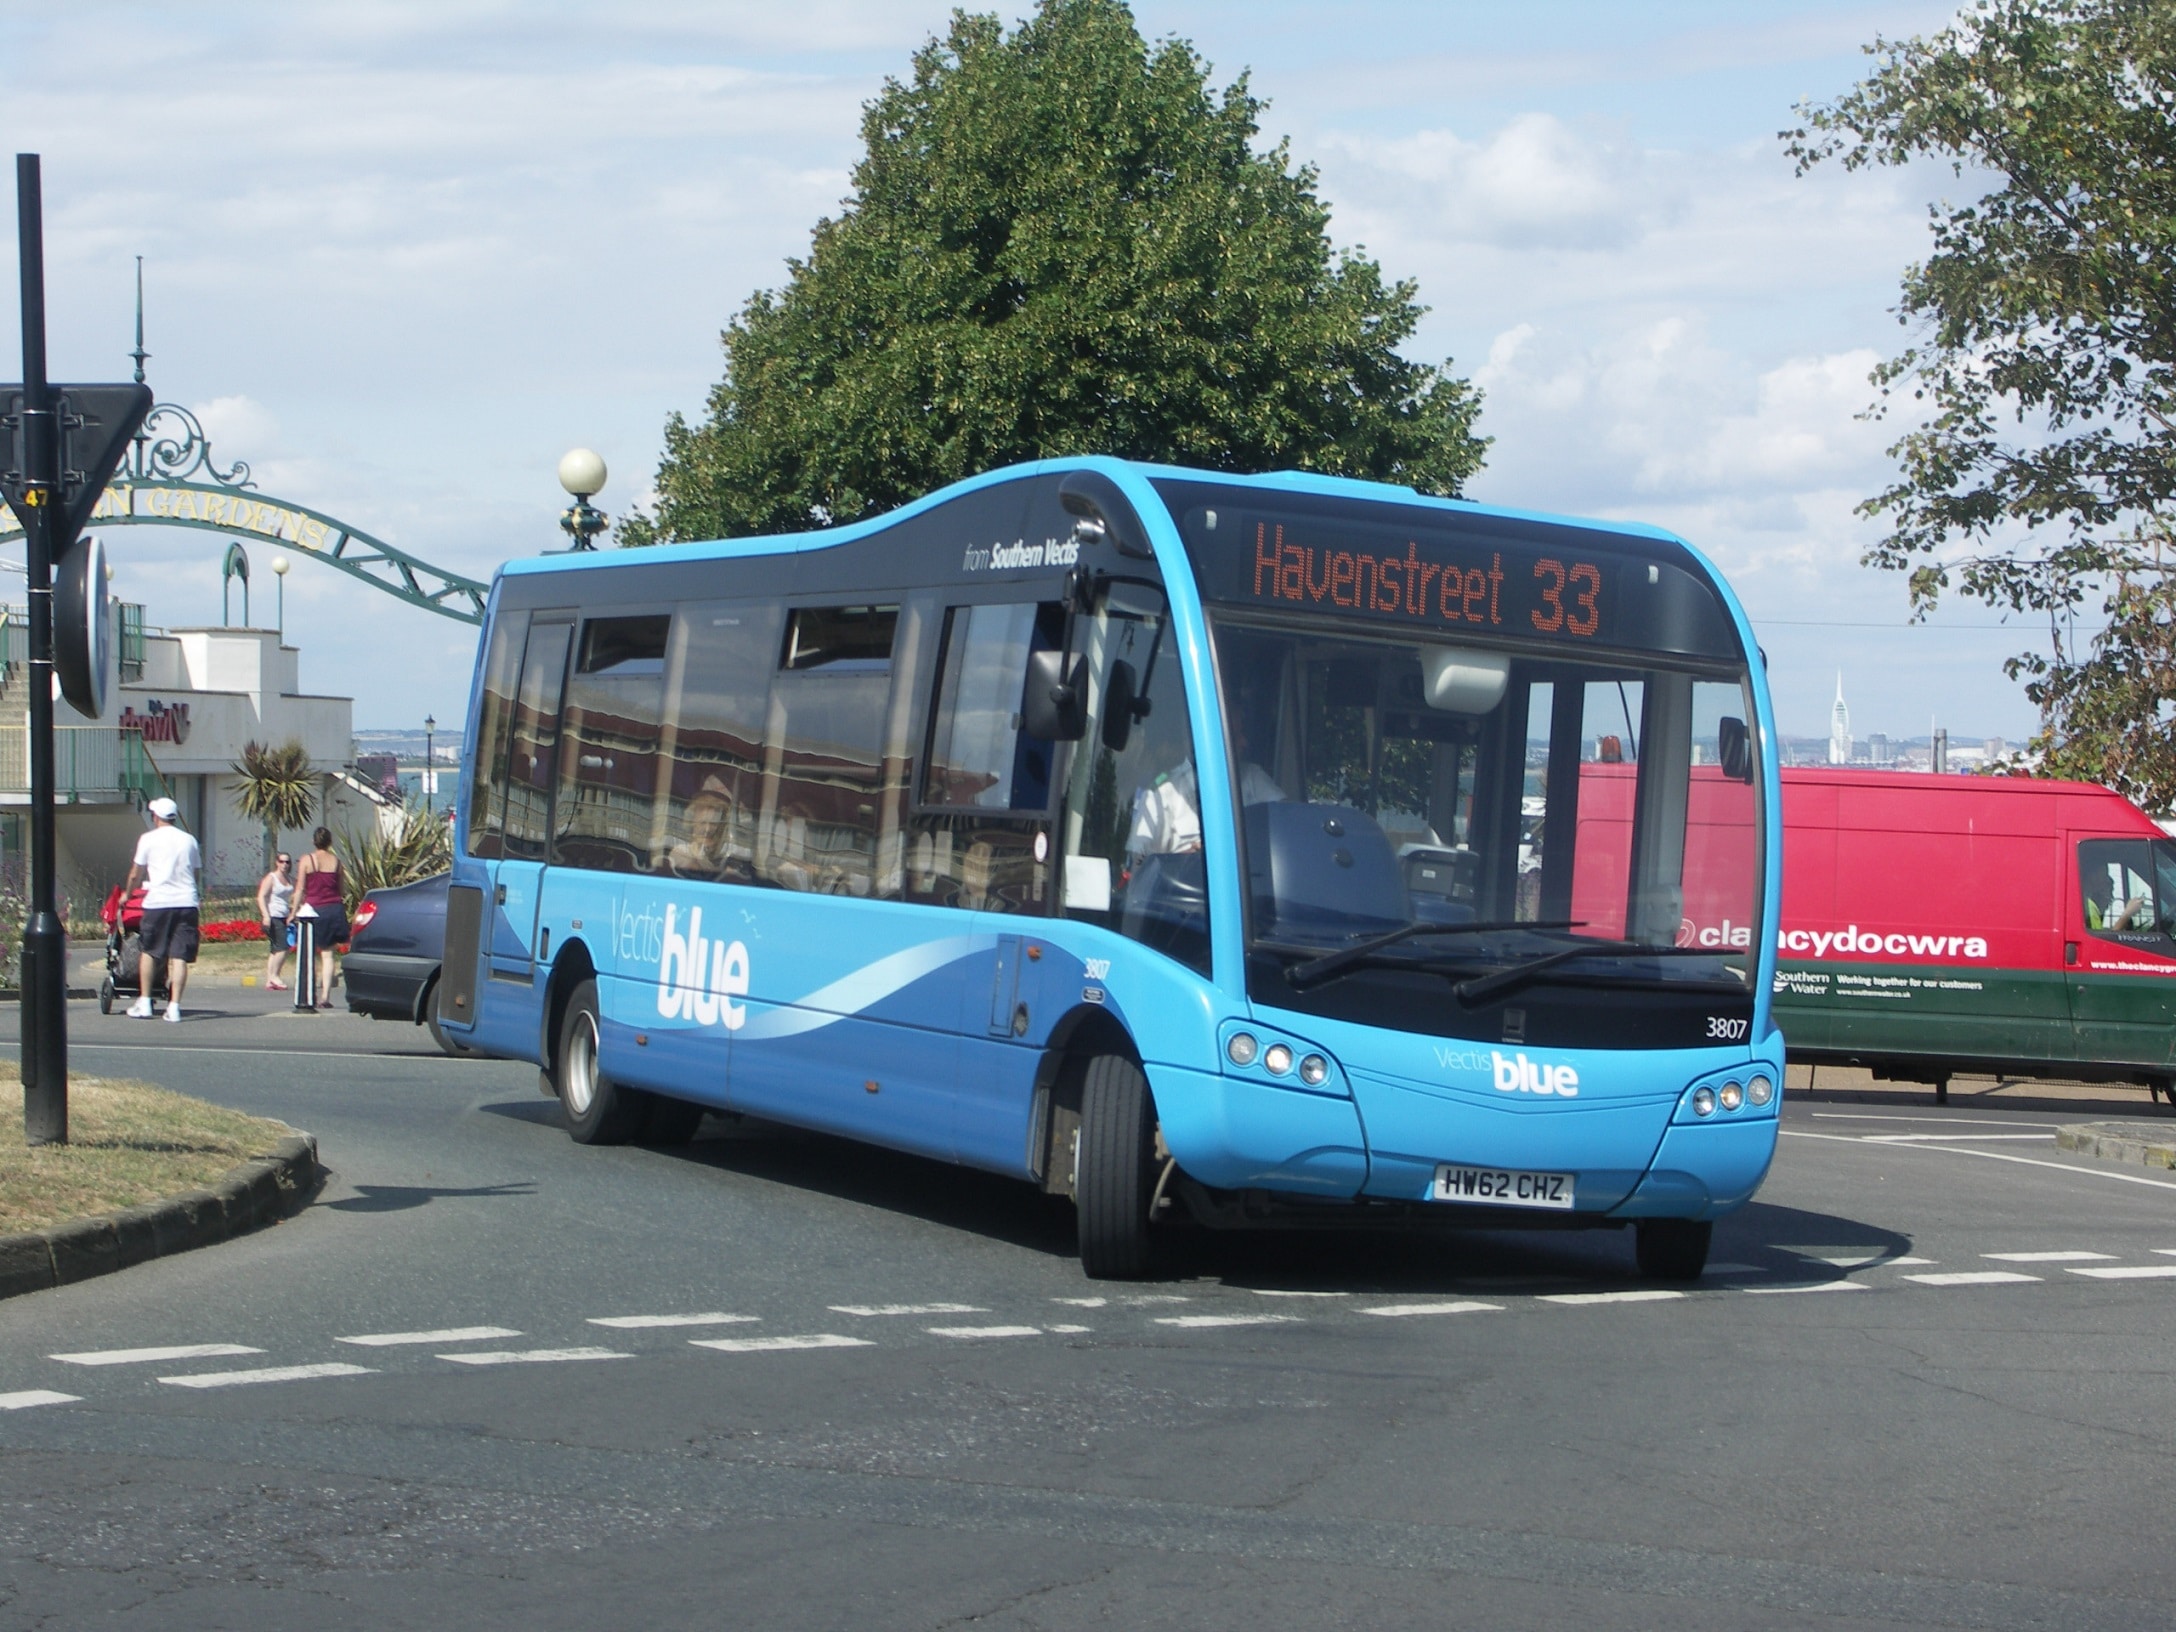 Bus Recovery Grant terms and conditions published